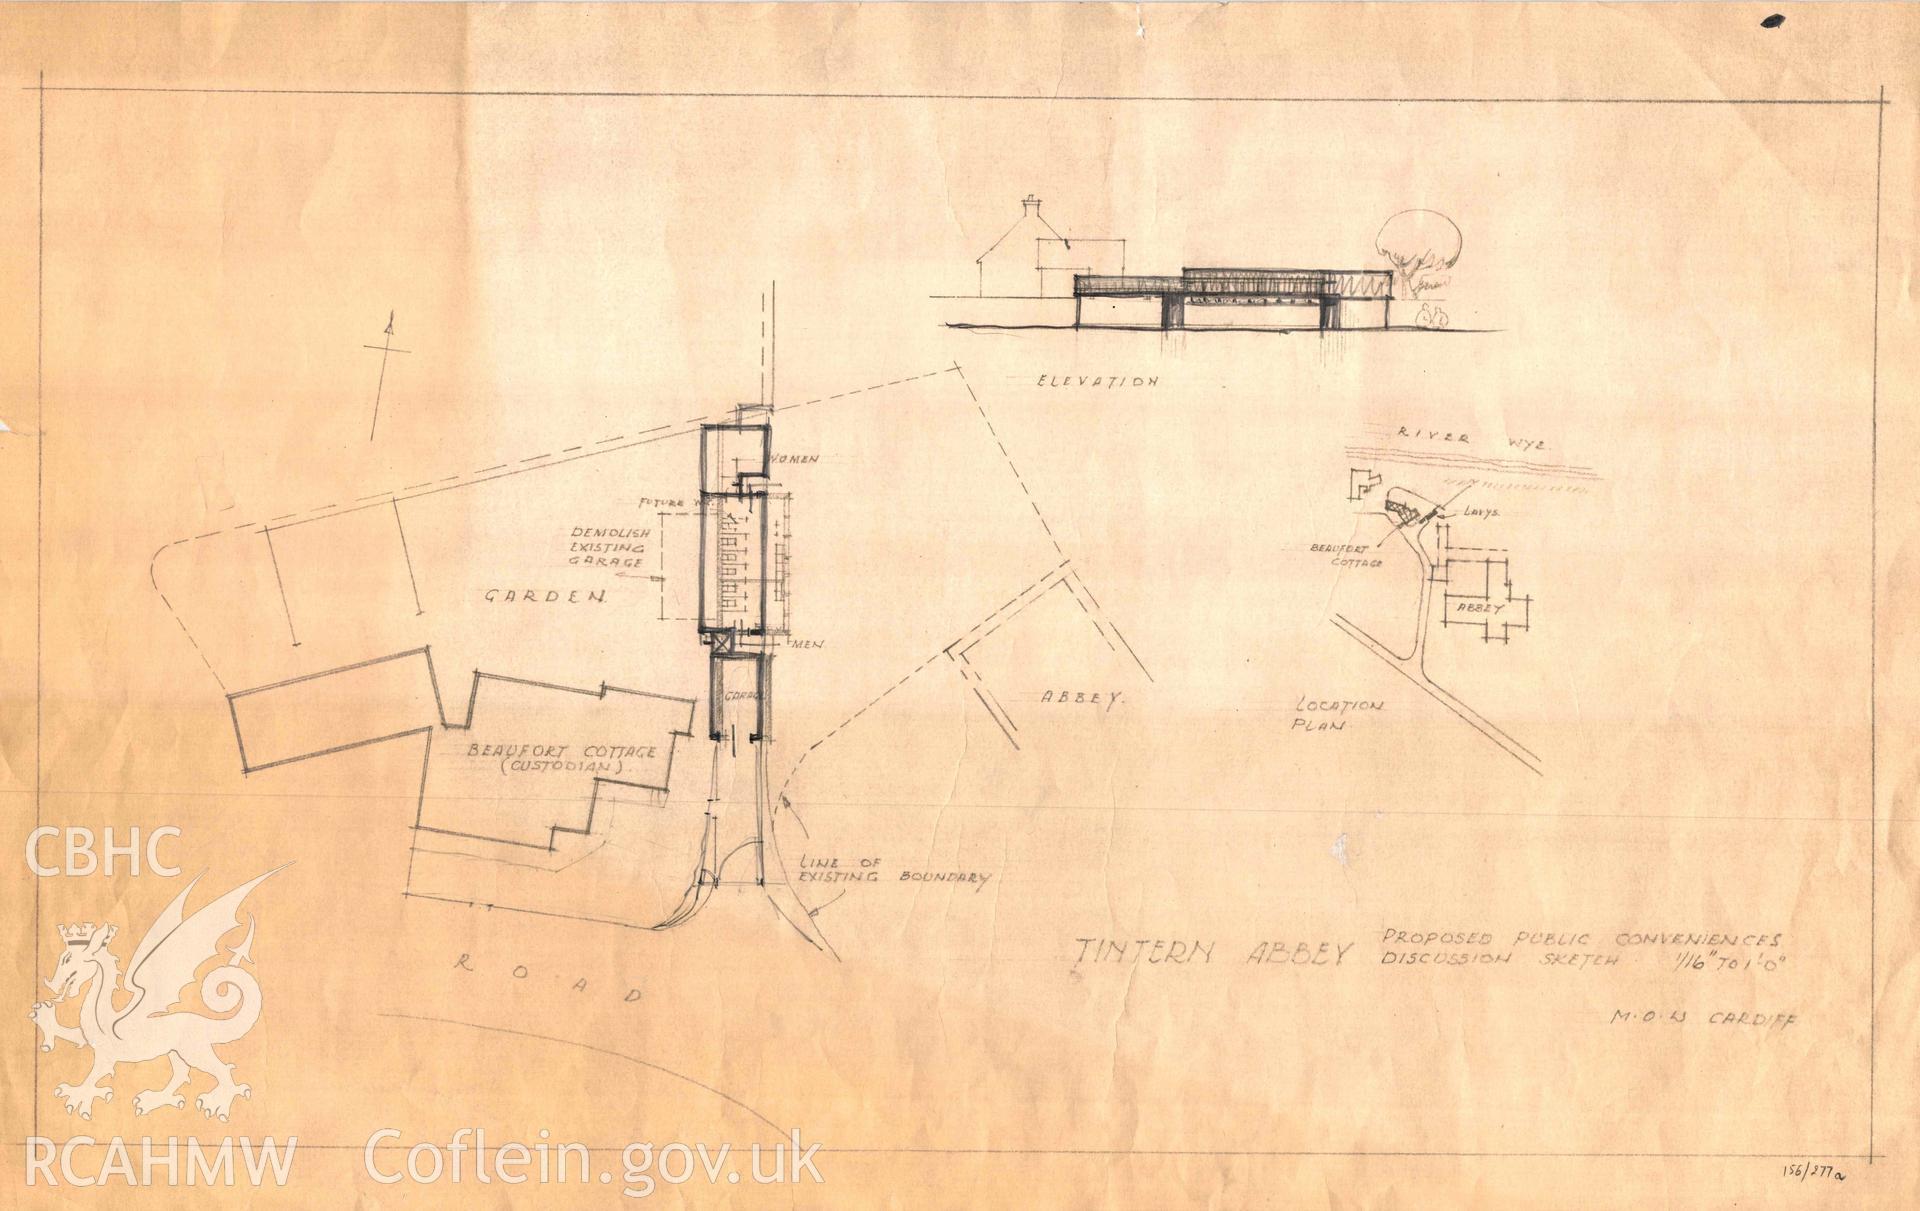 Cadw guardianship monument drawing, proposed public conveniences, discussion sketch, Tintern Abbey.  Undated.